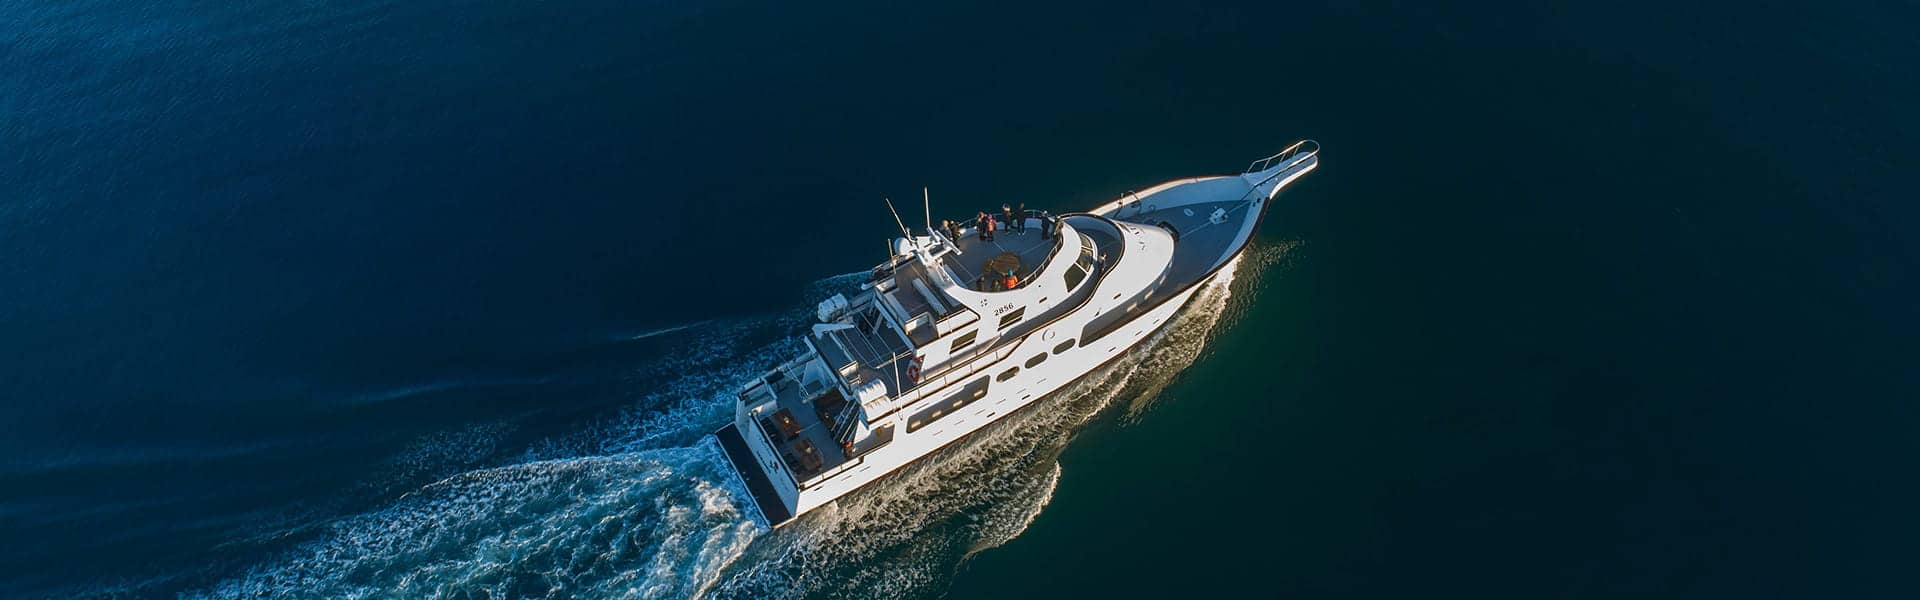 photograph of the luxury super yacht Amelia rose. It can be hired privately or join to go whale watching